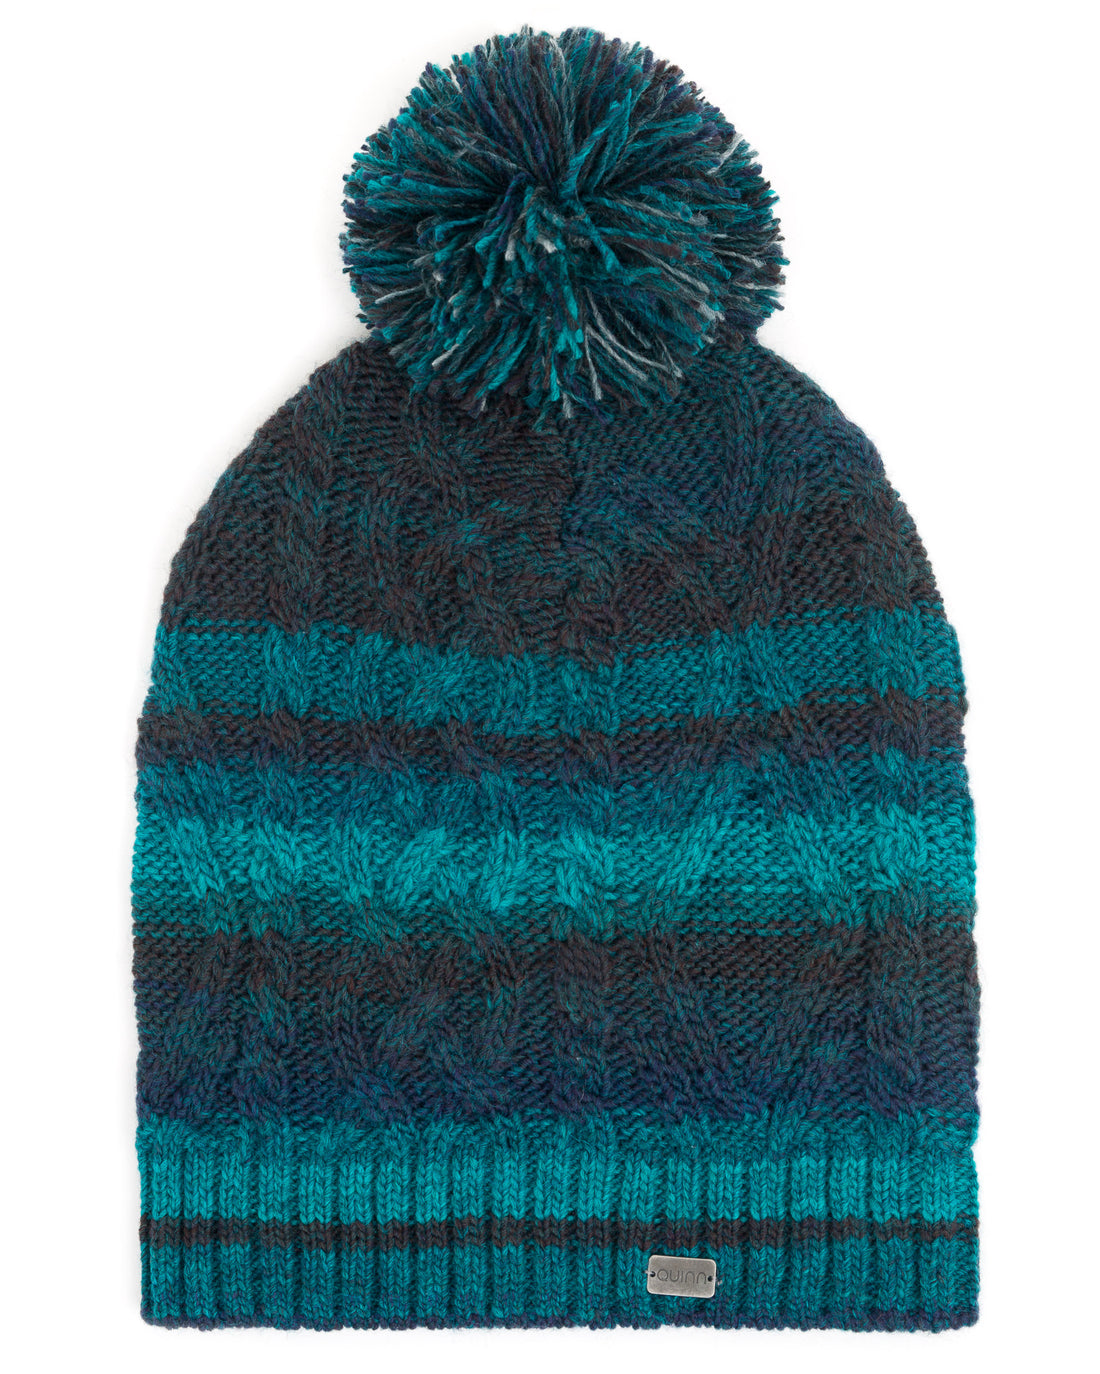 ACCESSORIES - Ombre Pom Pom Hat